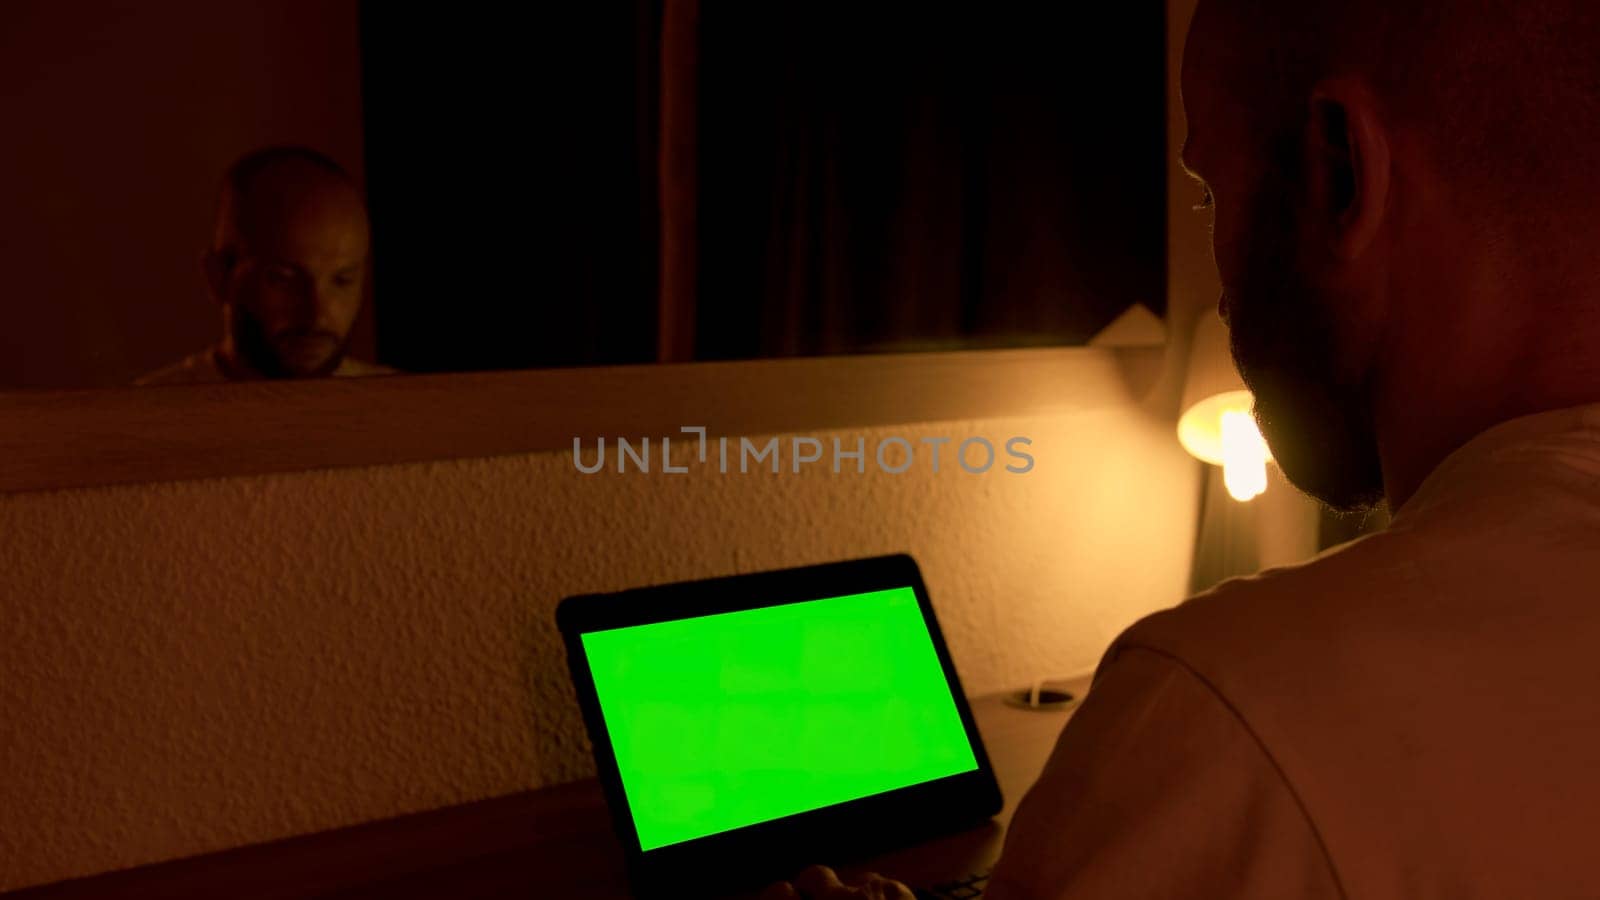 Man sitting at his desk, works on a laptop with green chroma key screen. Media. Man uses portable computer for work at home at night in front of mirror